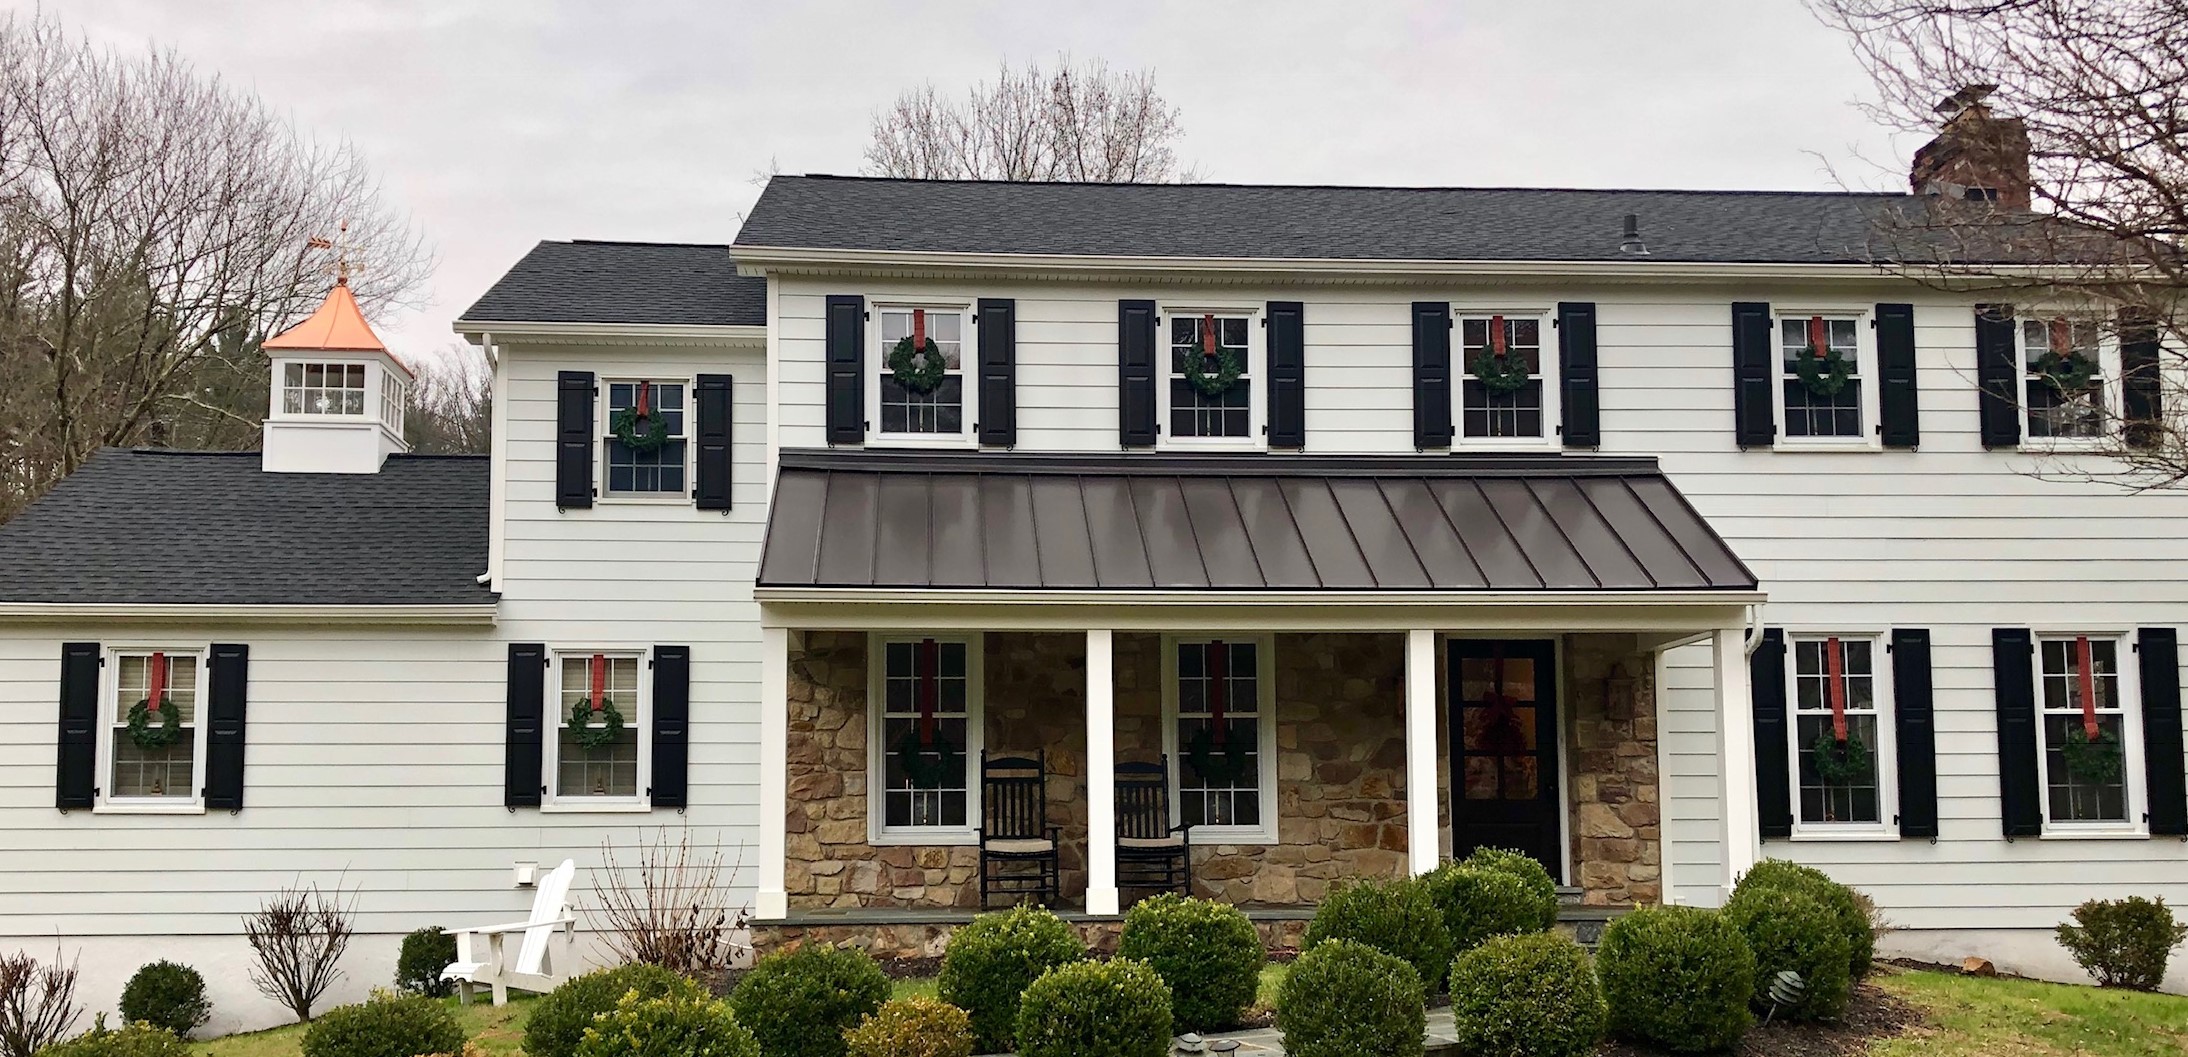 Exterior of a home with white siding, and windows with holiday wreaths hanging